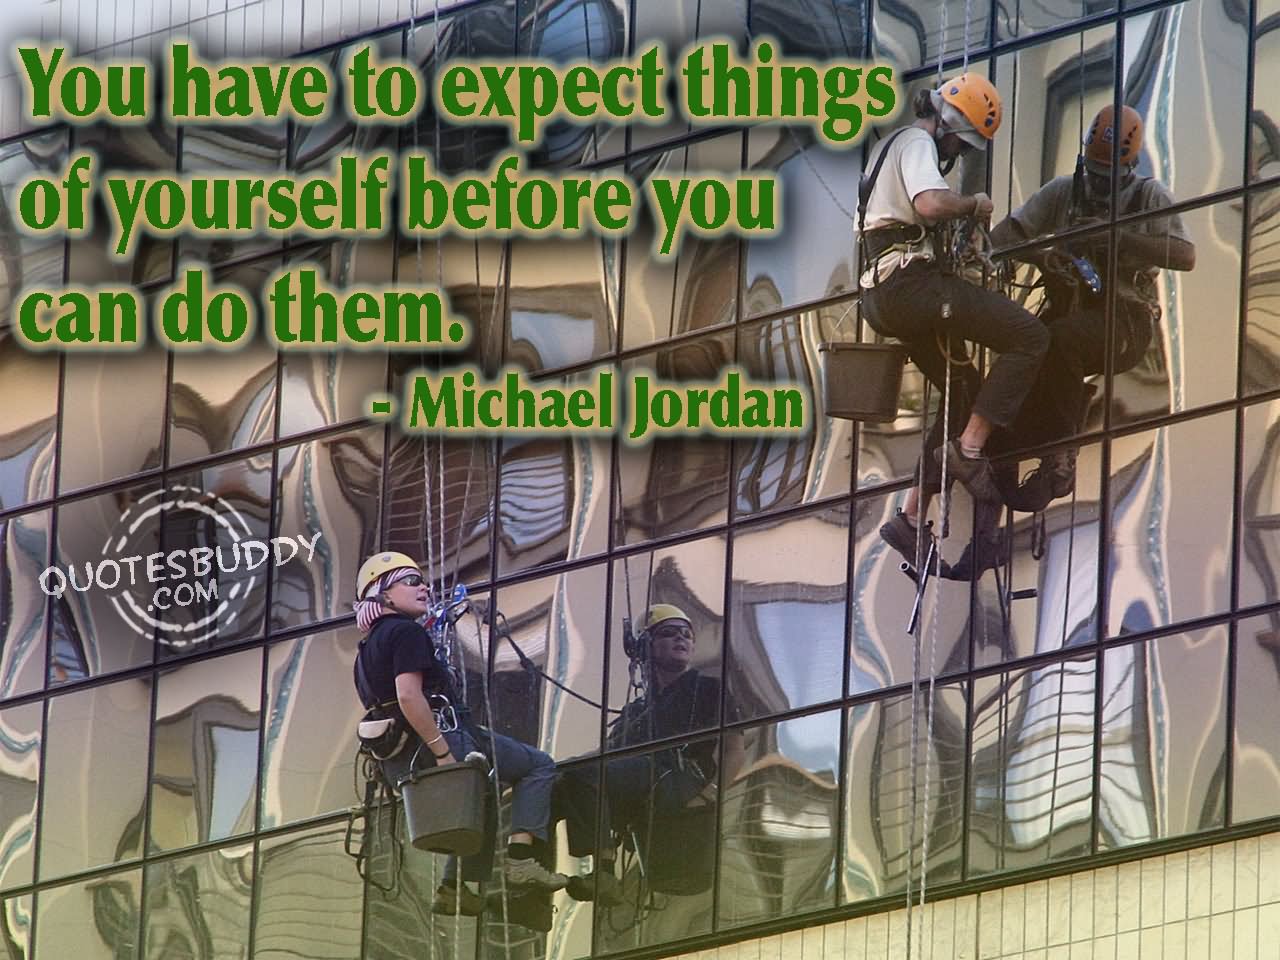 You have to expect things of yourself before you can do them. - Michael Jordan